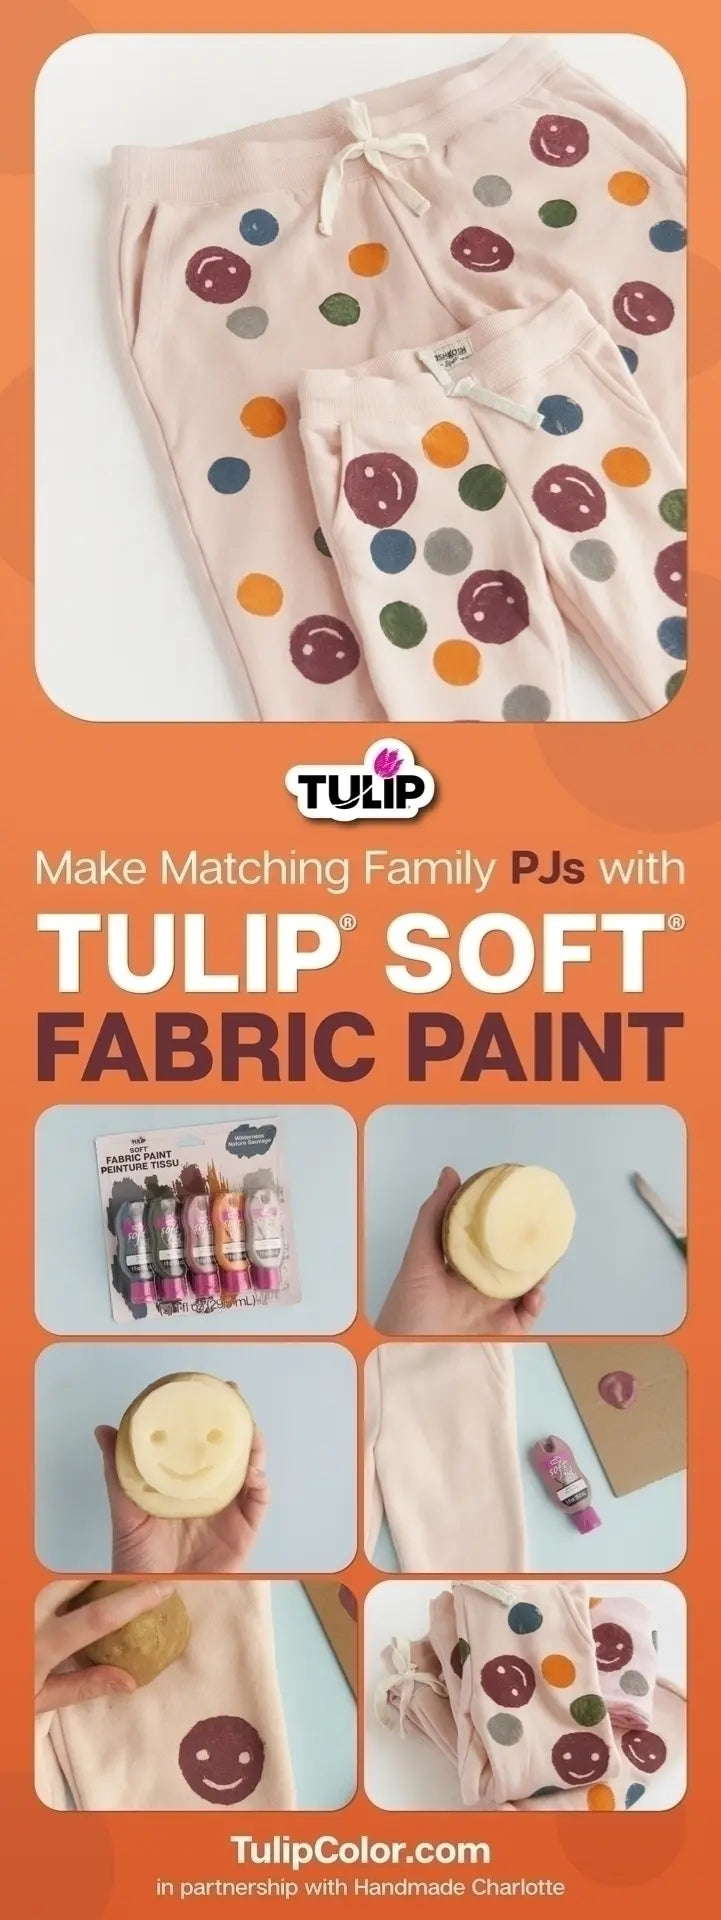 How to Use Fabric Paint for Matching Family PJs